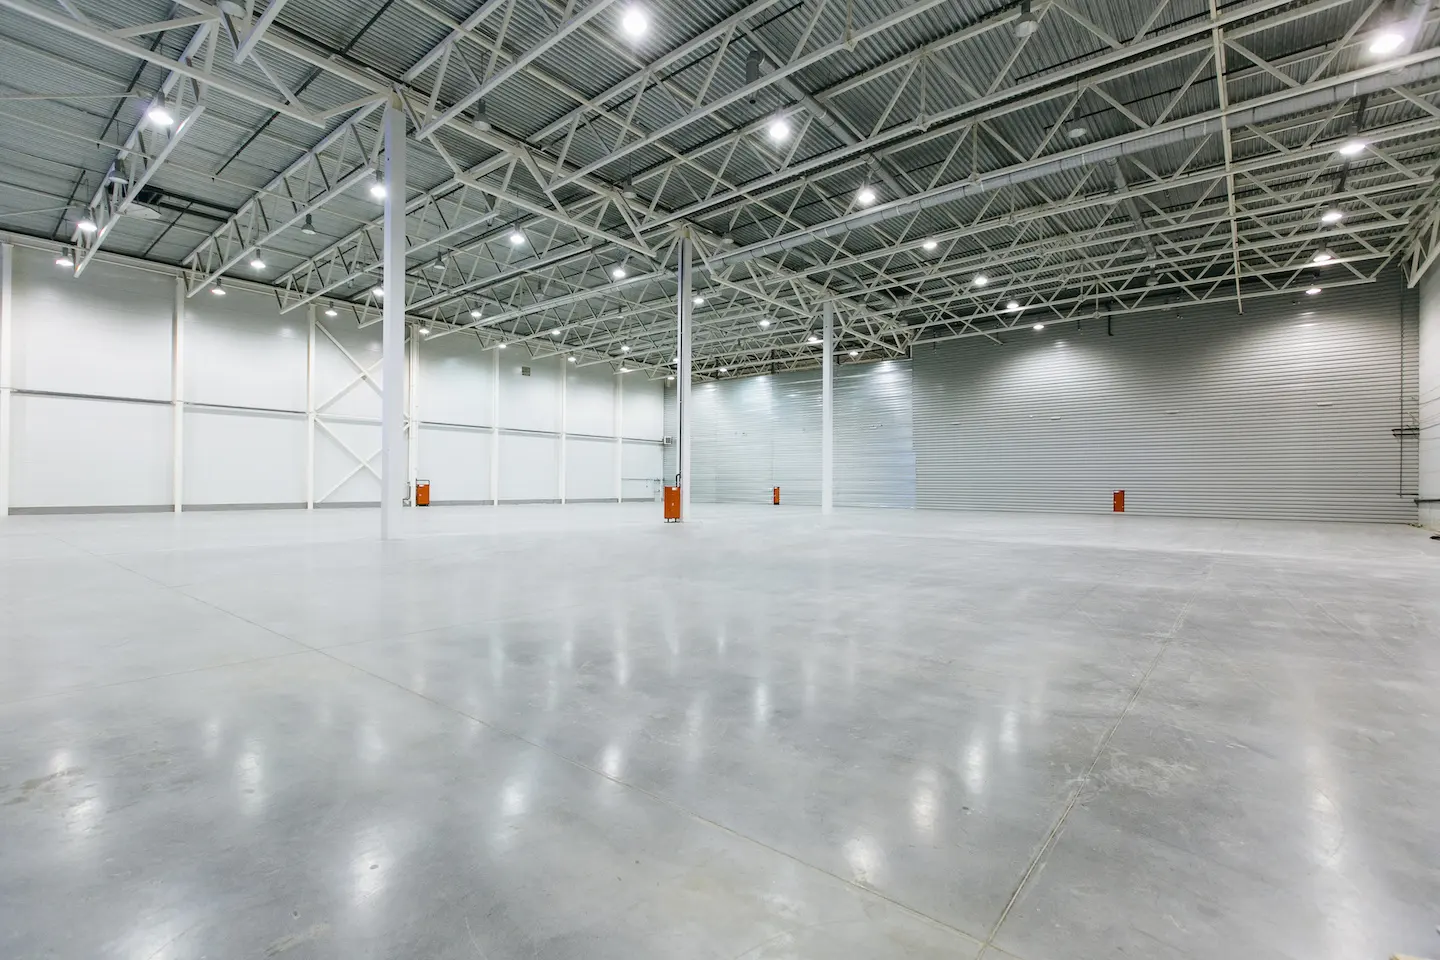 Commercial warehouse in Austin with high bay lighting.